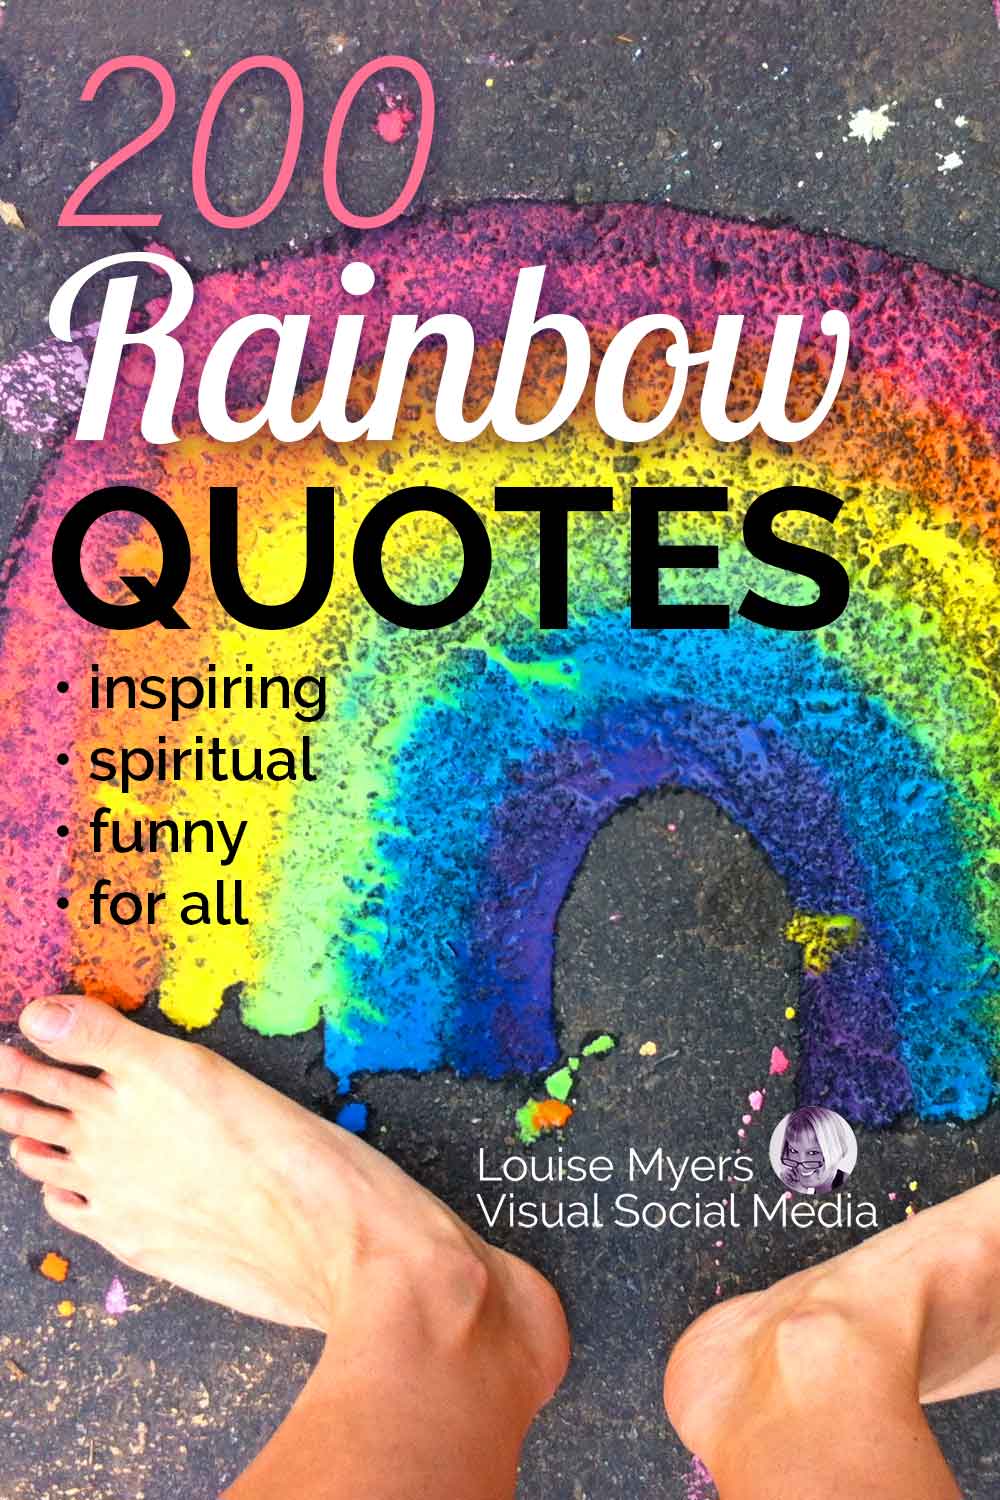 chalk drawing of rainbow on pavement with feet making the clouds says 200 rainbow quotes.